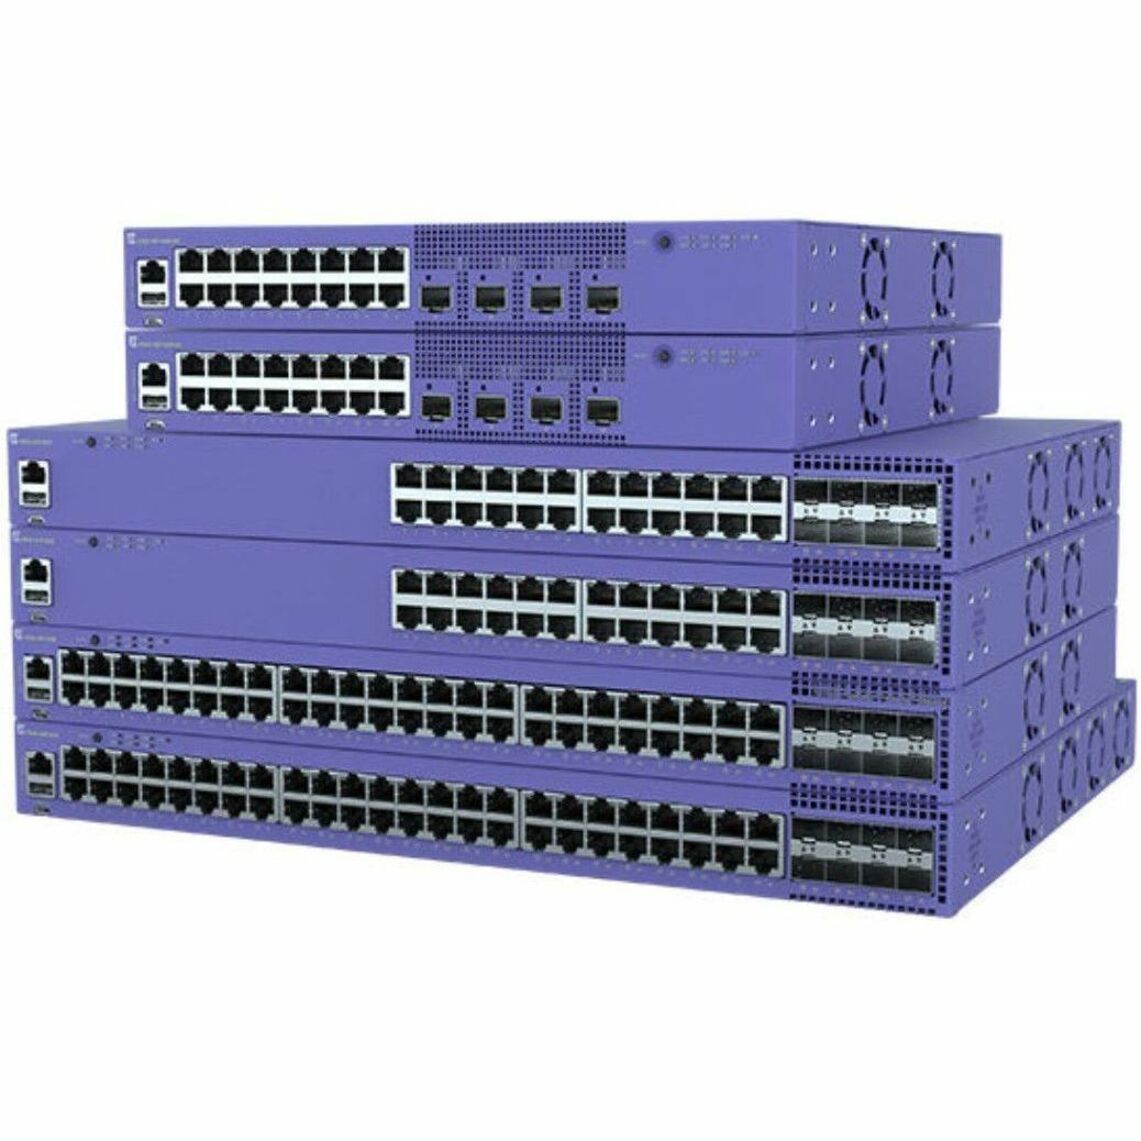 Extreme Networks 5320-24T-8XE ExtremeSwitching Ethernet Switch, 24 Port Gigabit Ethernet, 8 Port 10 Gigabit Ethernet